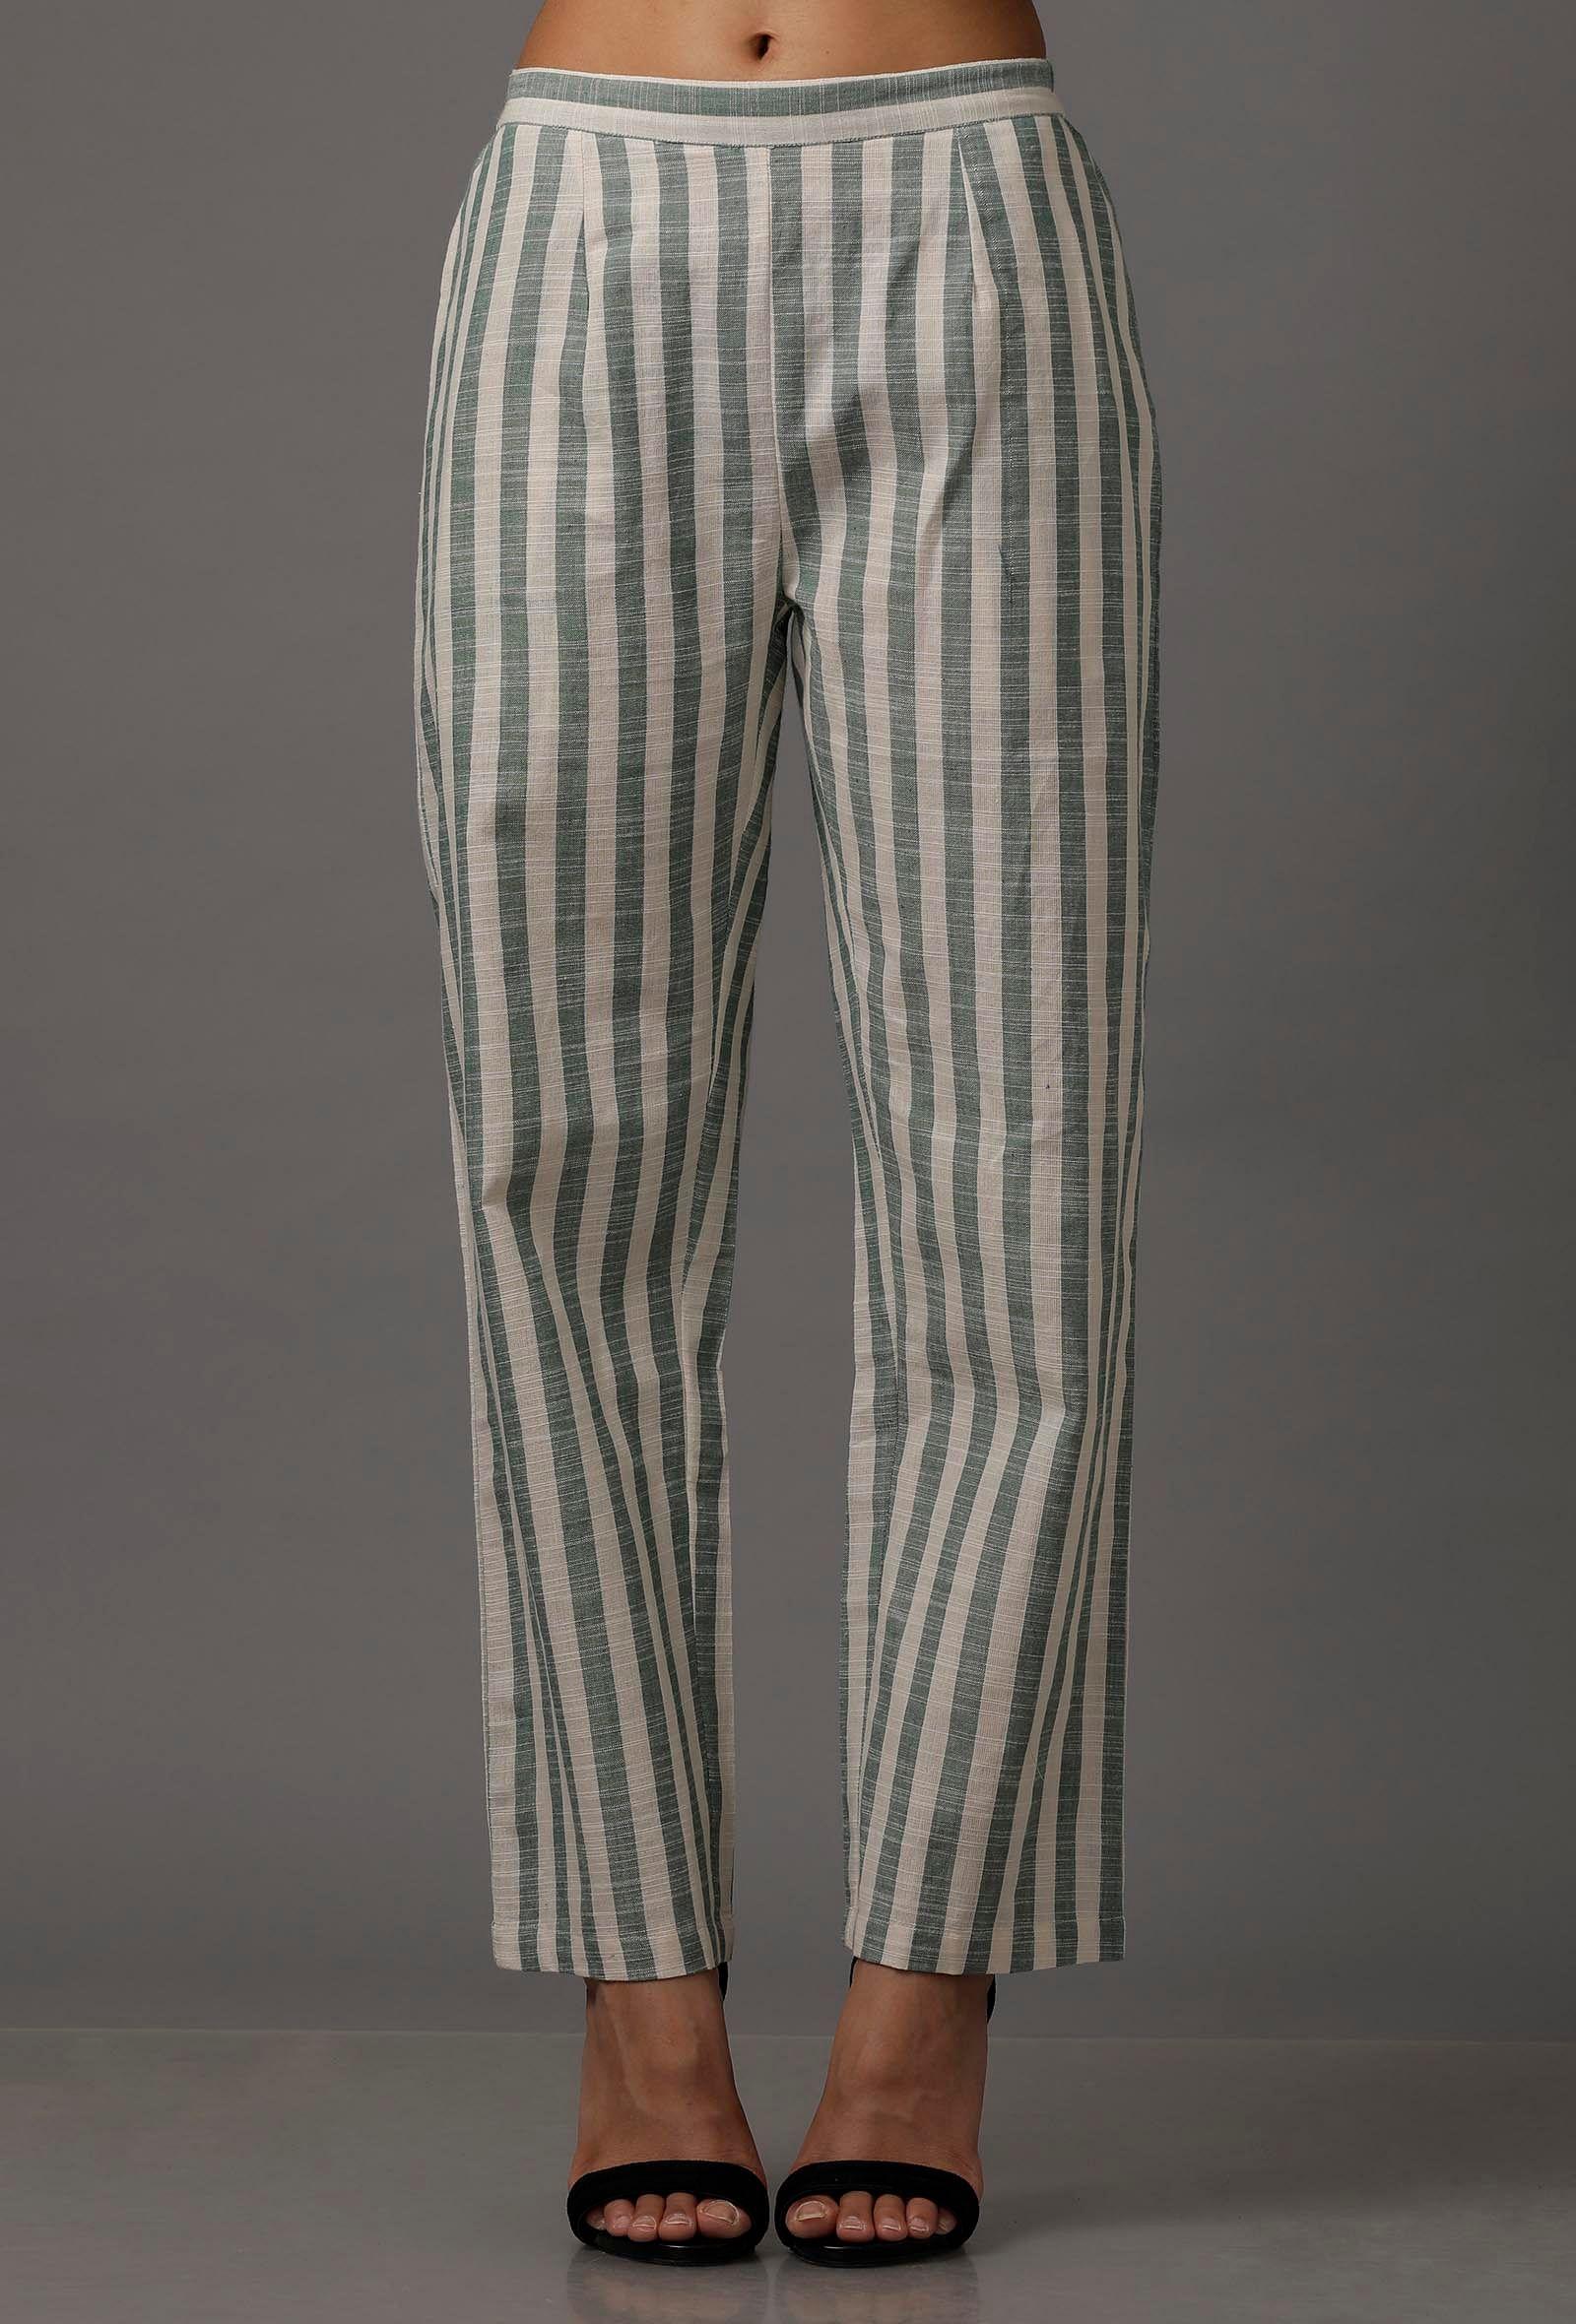 green-and-white-stripes-pure-woven-cotton-pants